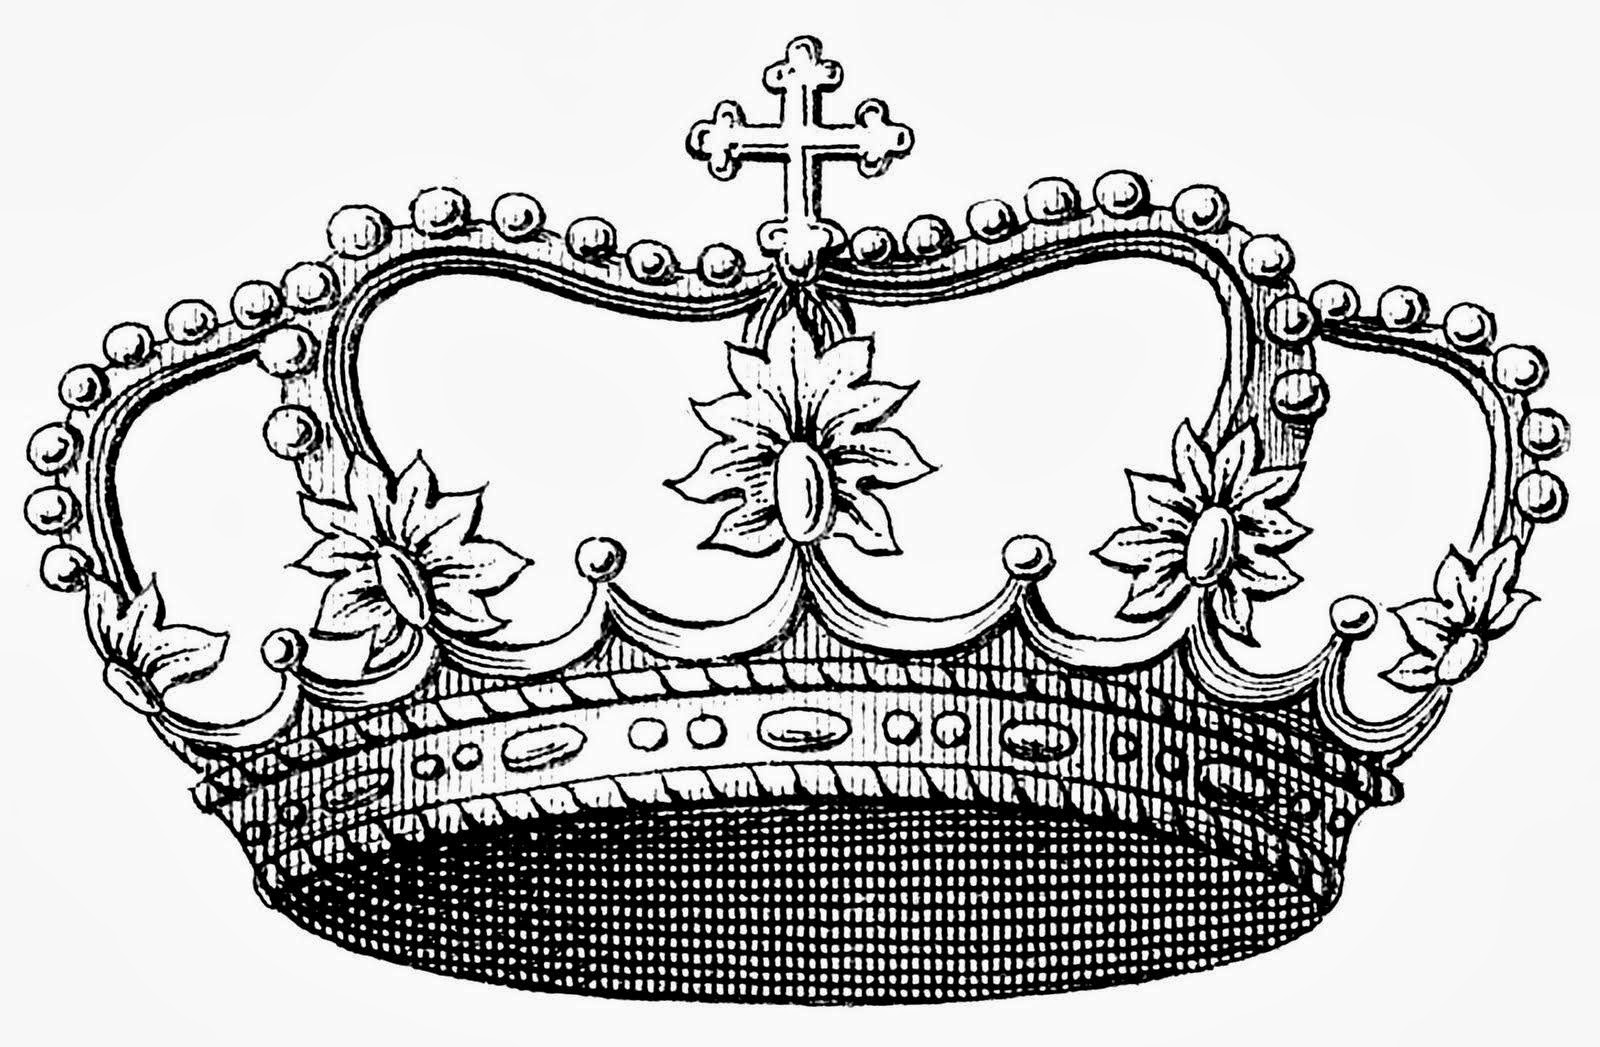 Queen crown - Crown drawing - Queen Crown Drawing | Management Science